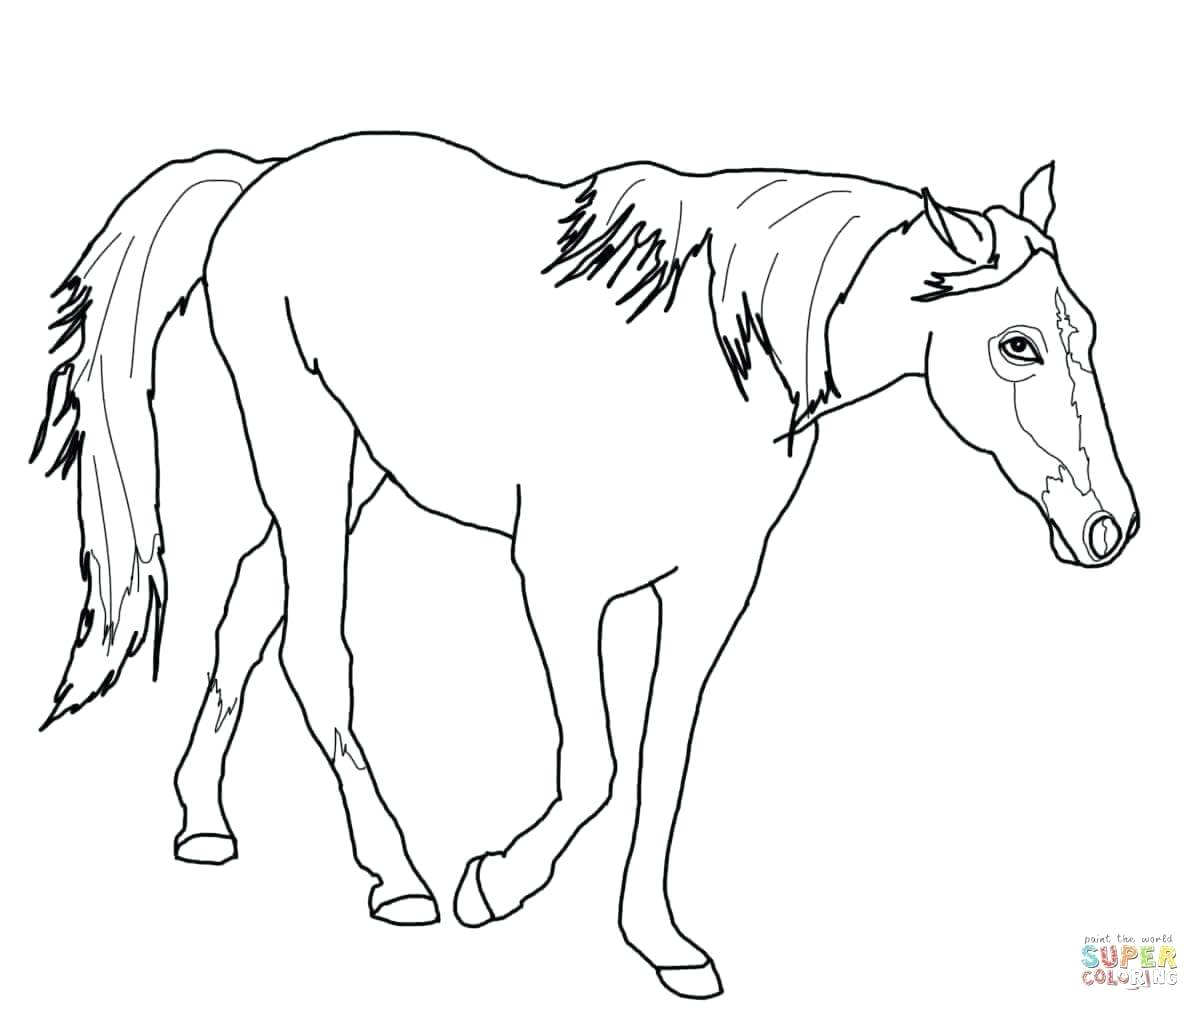 Bull Riding Coloring Pages Rodeo Bull Coloring Pages Reddogsheetco